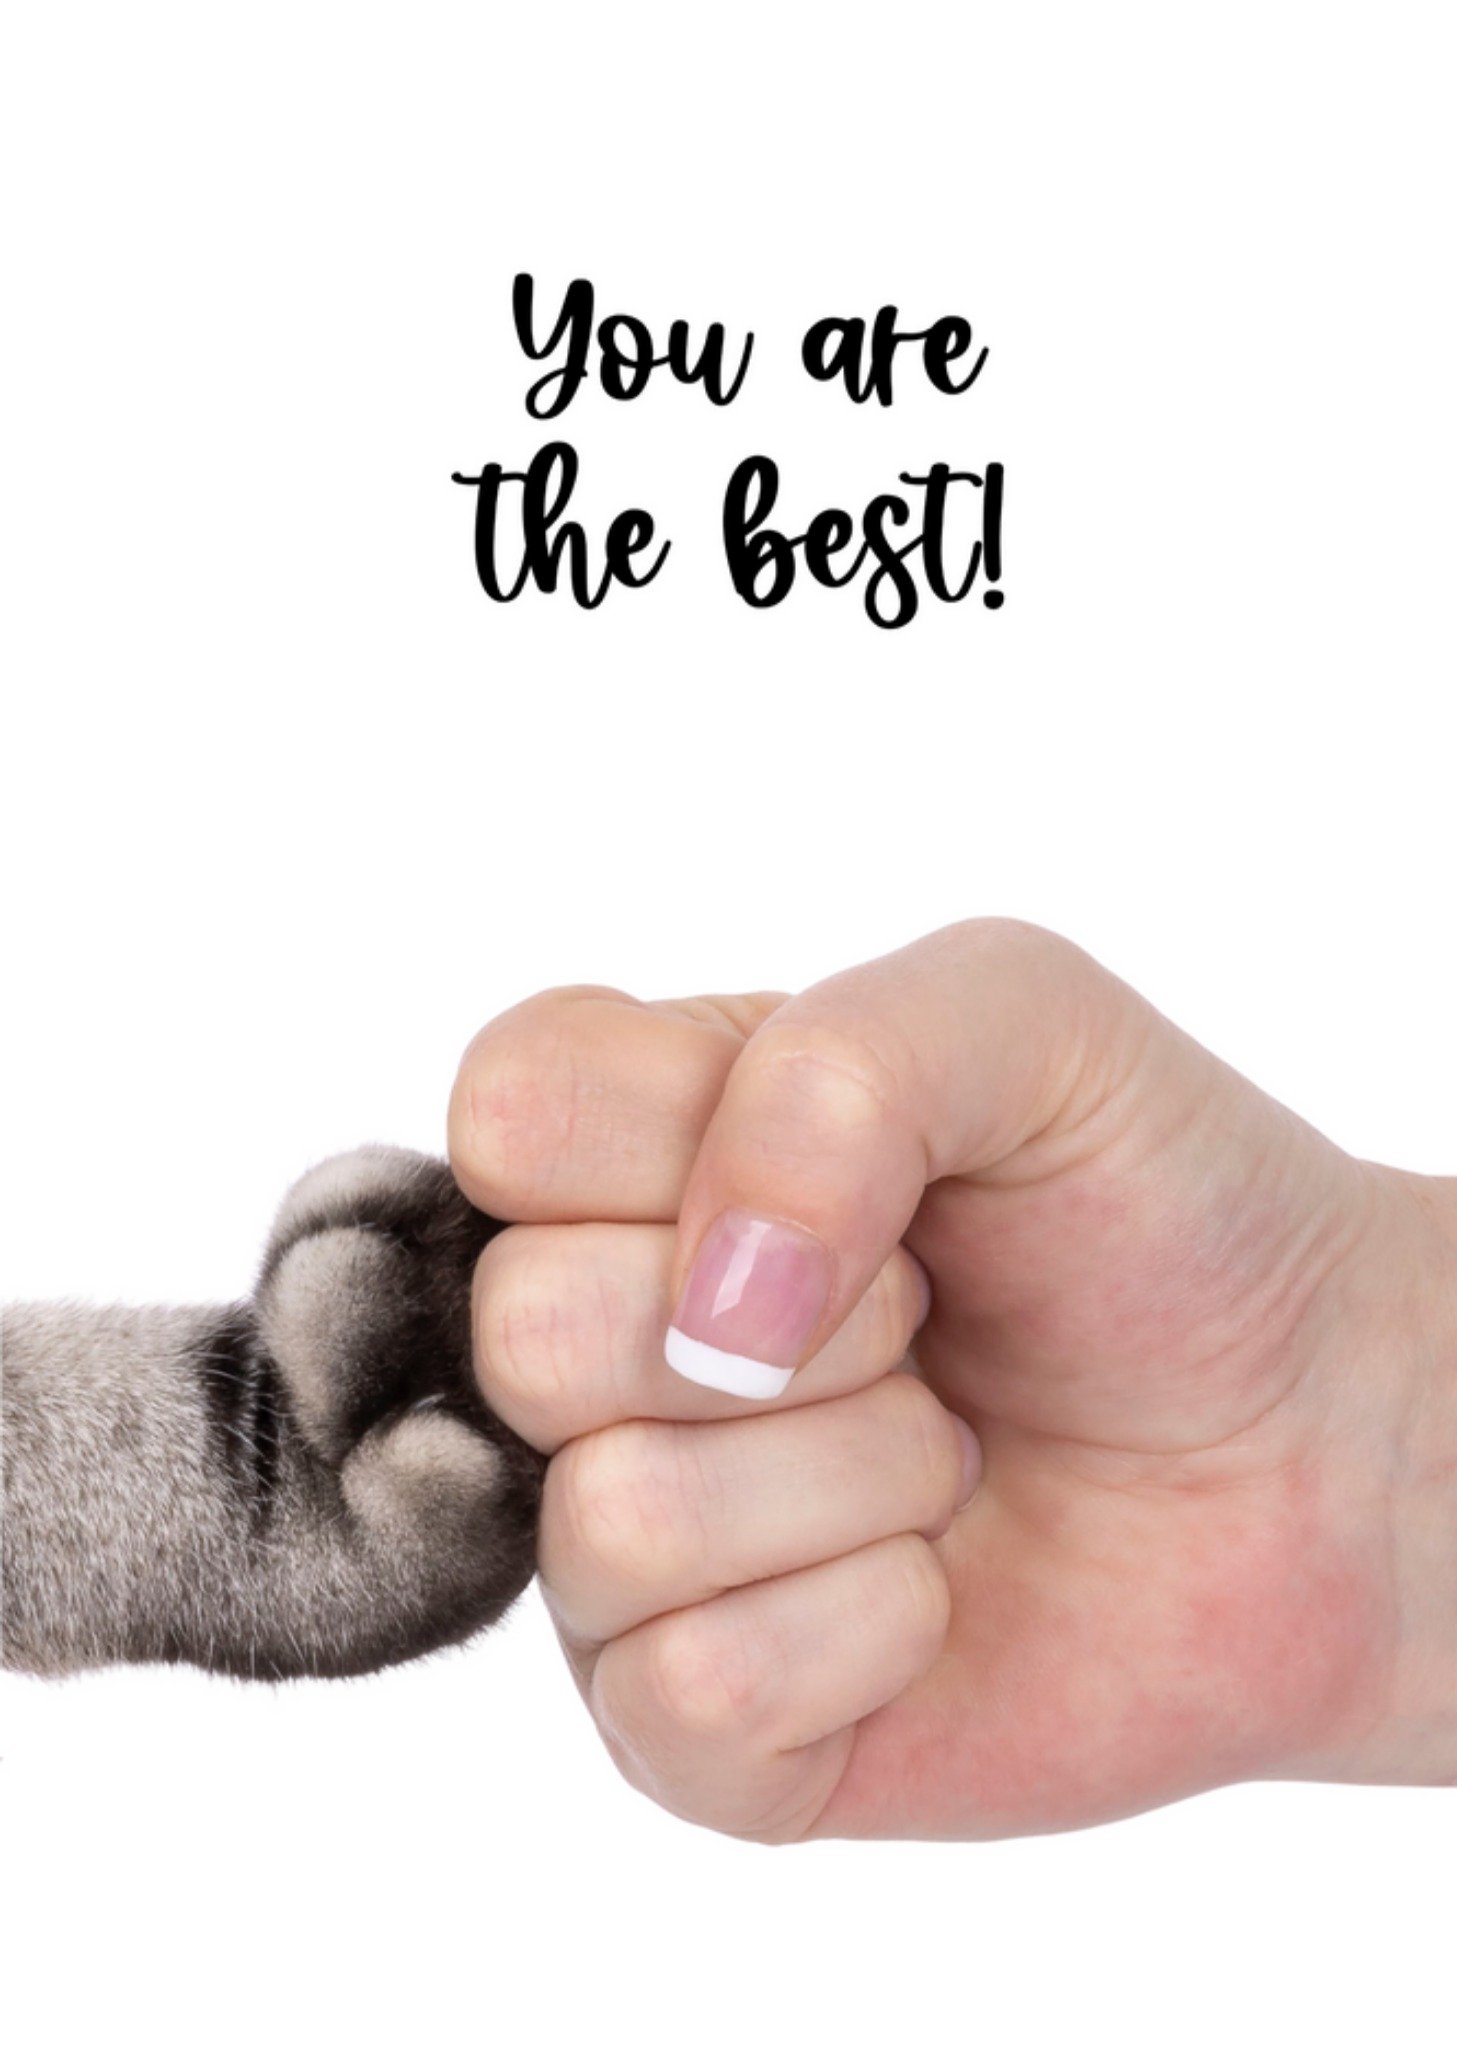 Catchy Images - Complimentendag kaart - You are the best!